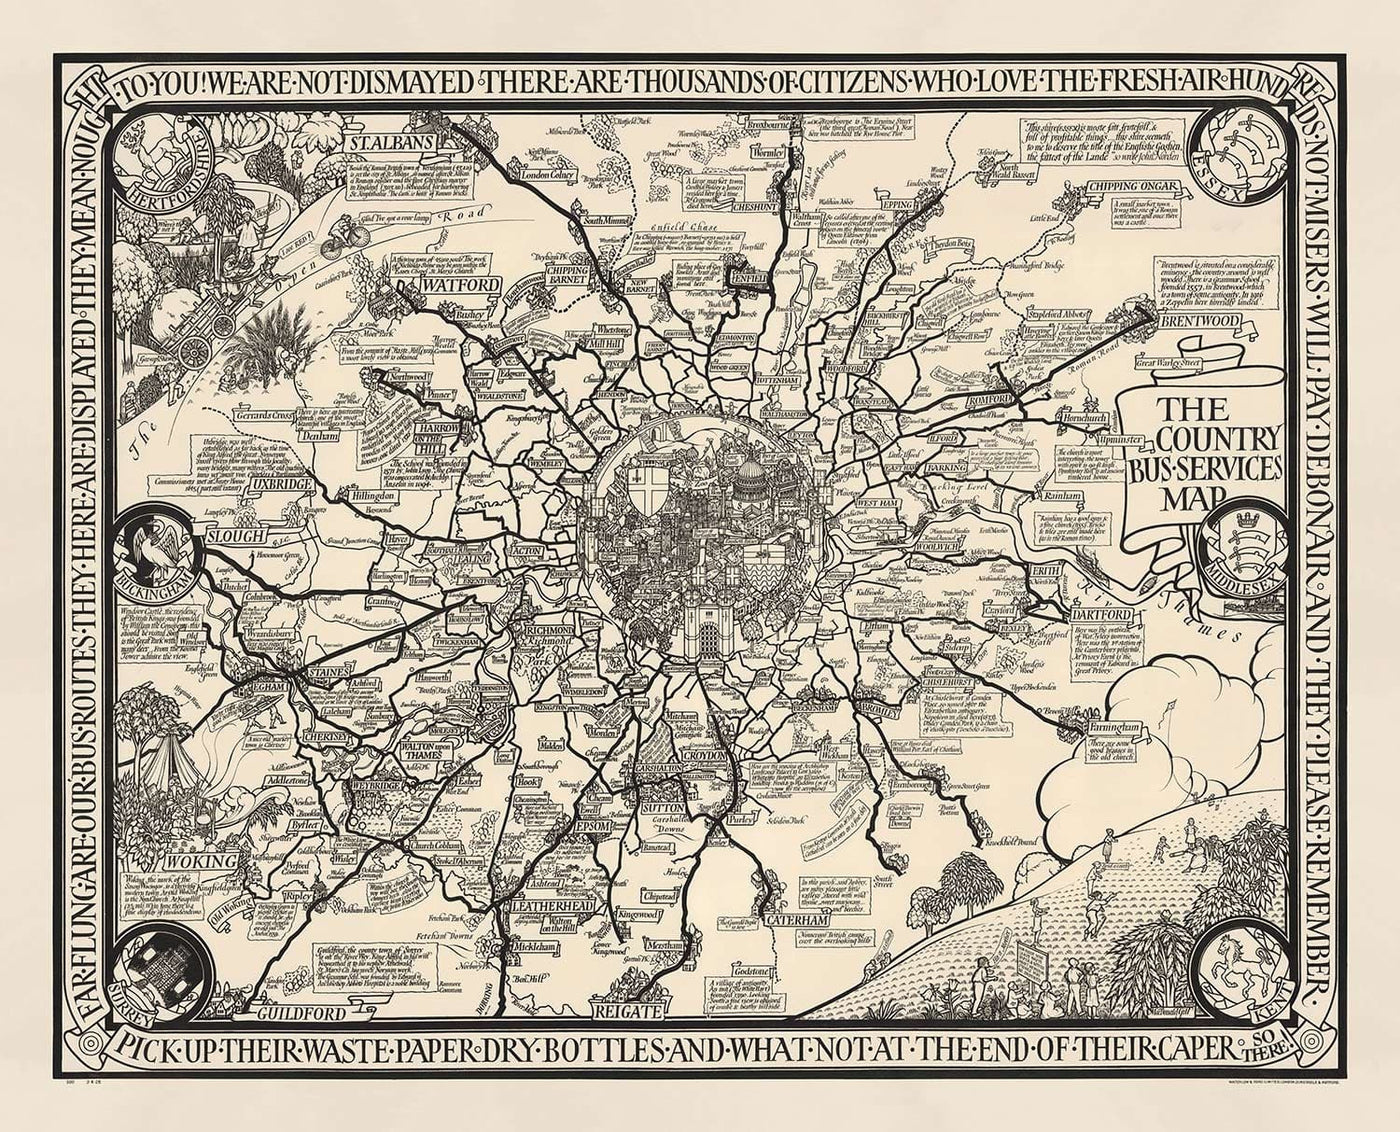 Old Monochrome Map of London, Suburbs & Commuter Belt by Max Gill in 1928 - "Far flung are our bus routes"